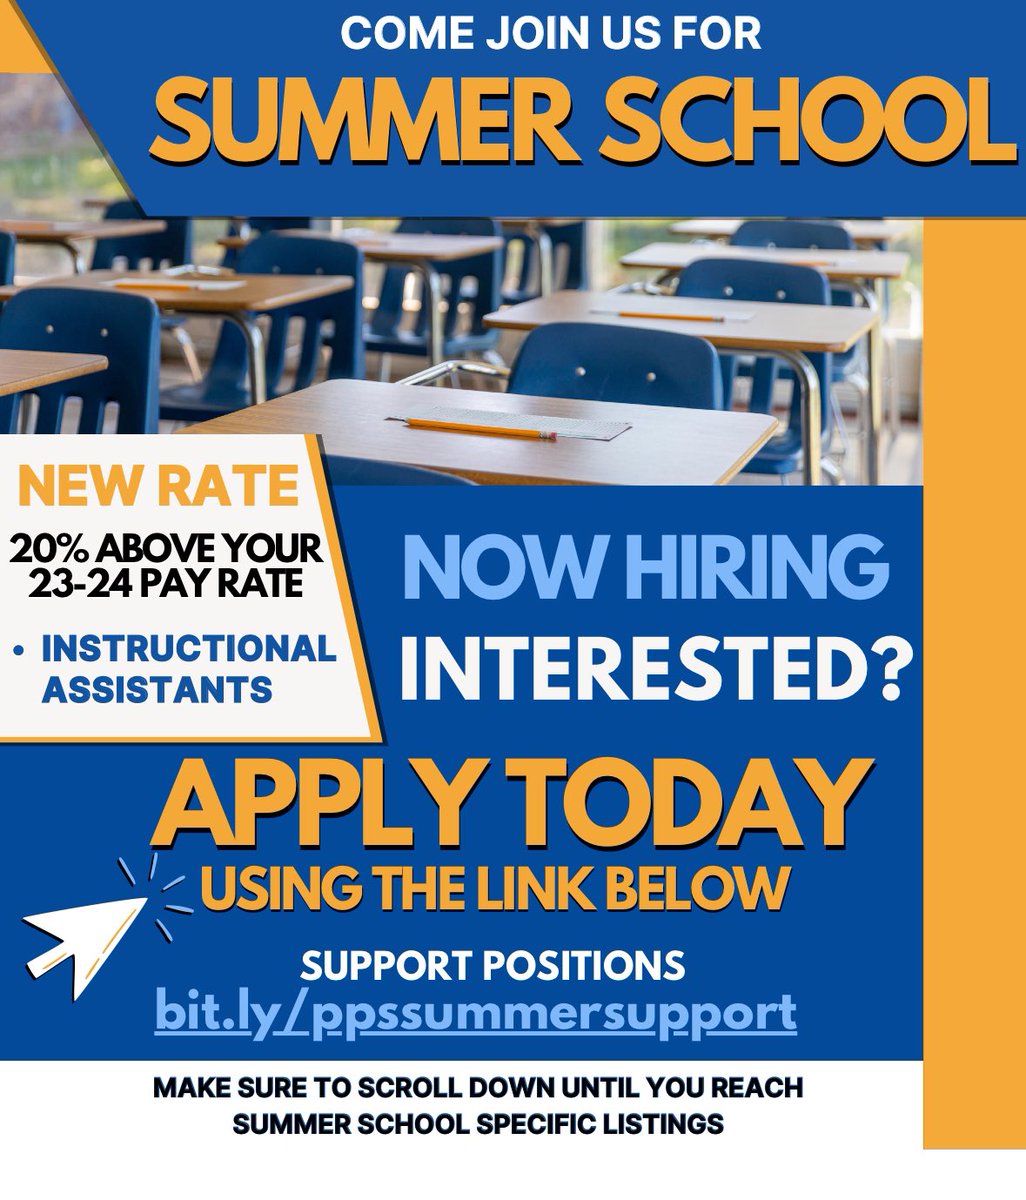 We are hiring for @PortsVASchools summer school positions soon! Be sure to apply now. Great summer pay! Teaching staff can apply here: ats3.atenterprise.powerschool.com/ats/job_board?… Support staff can apply here: ats3.atenterprise.powerschool.com/ats/job_board?… Scroll down to find summer school positions.